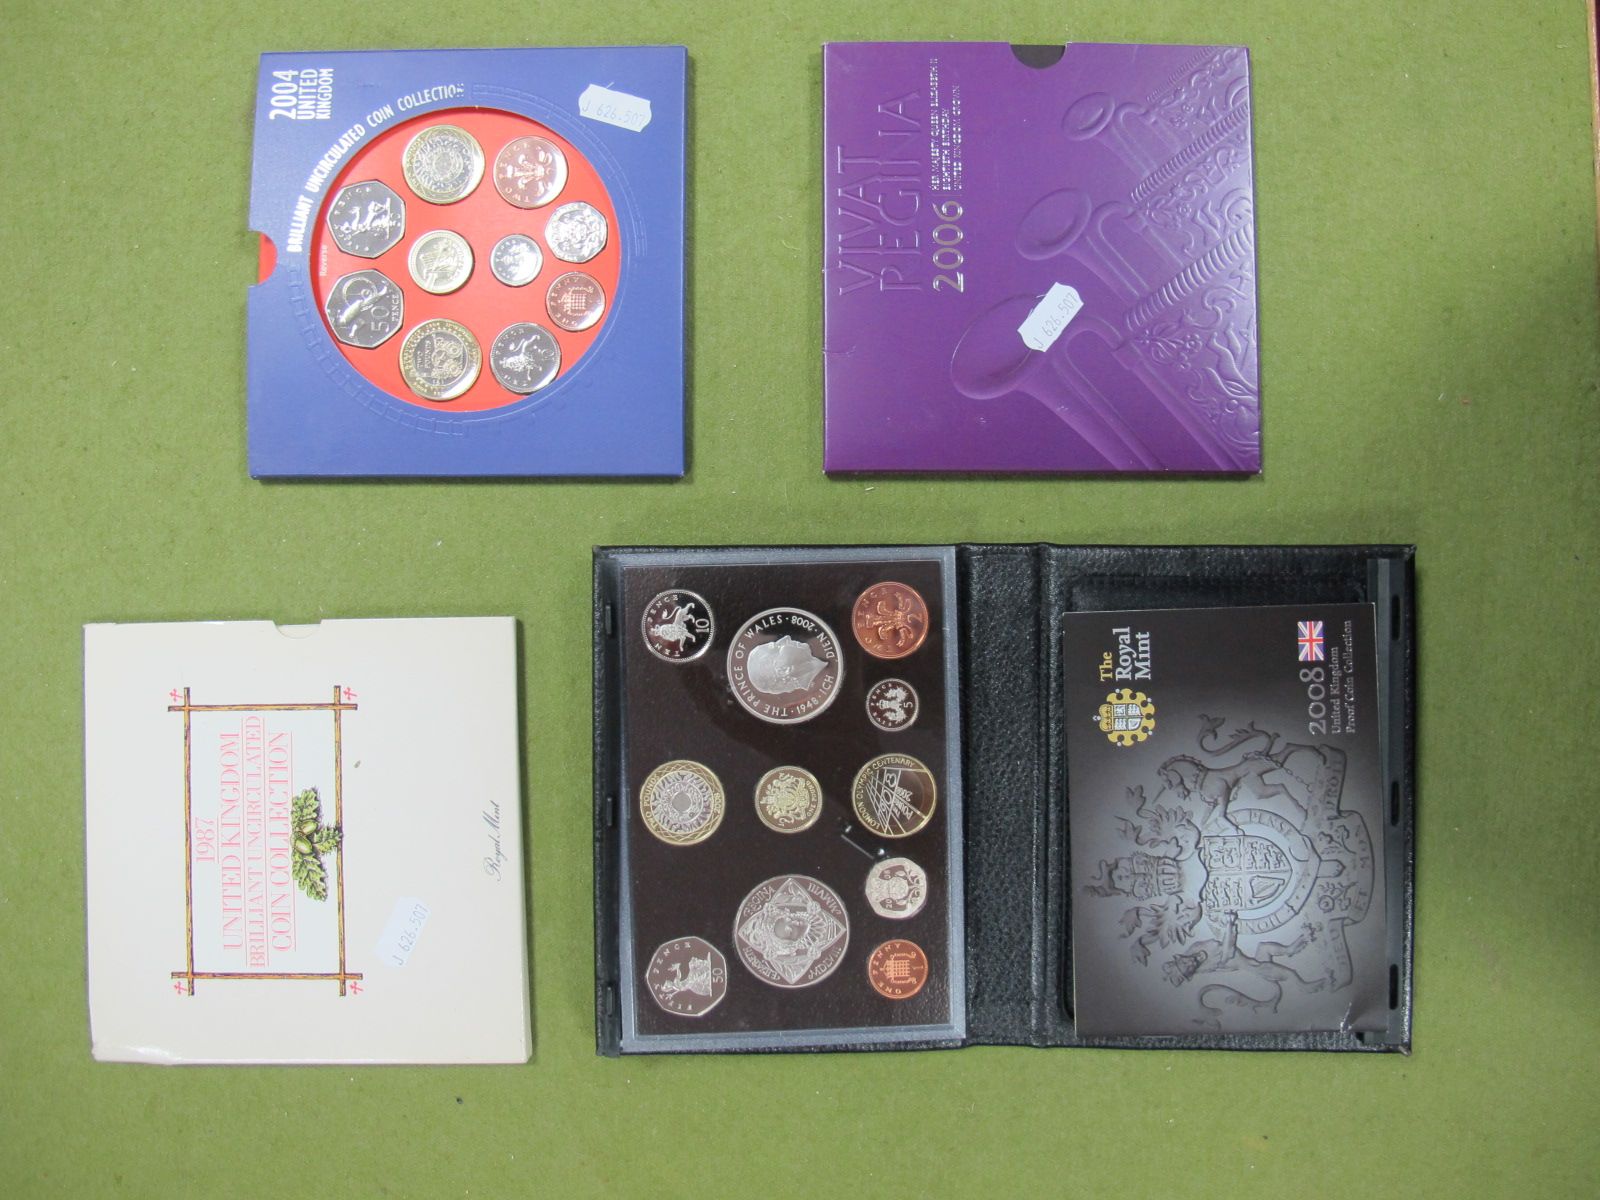 A GB Proof Set, 2008, UK Brilliant Uncirculated coin collections: 1987, 2004 and 2006.